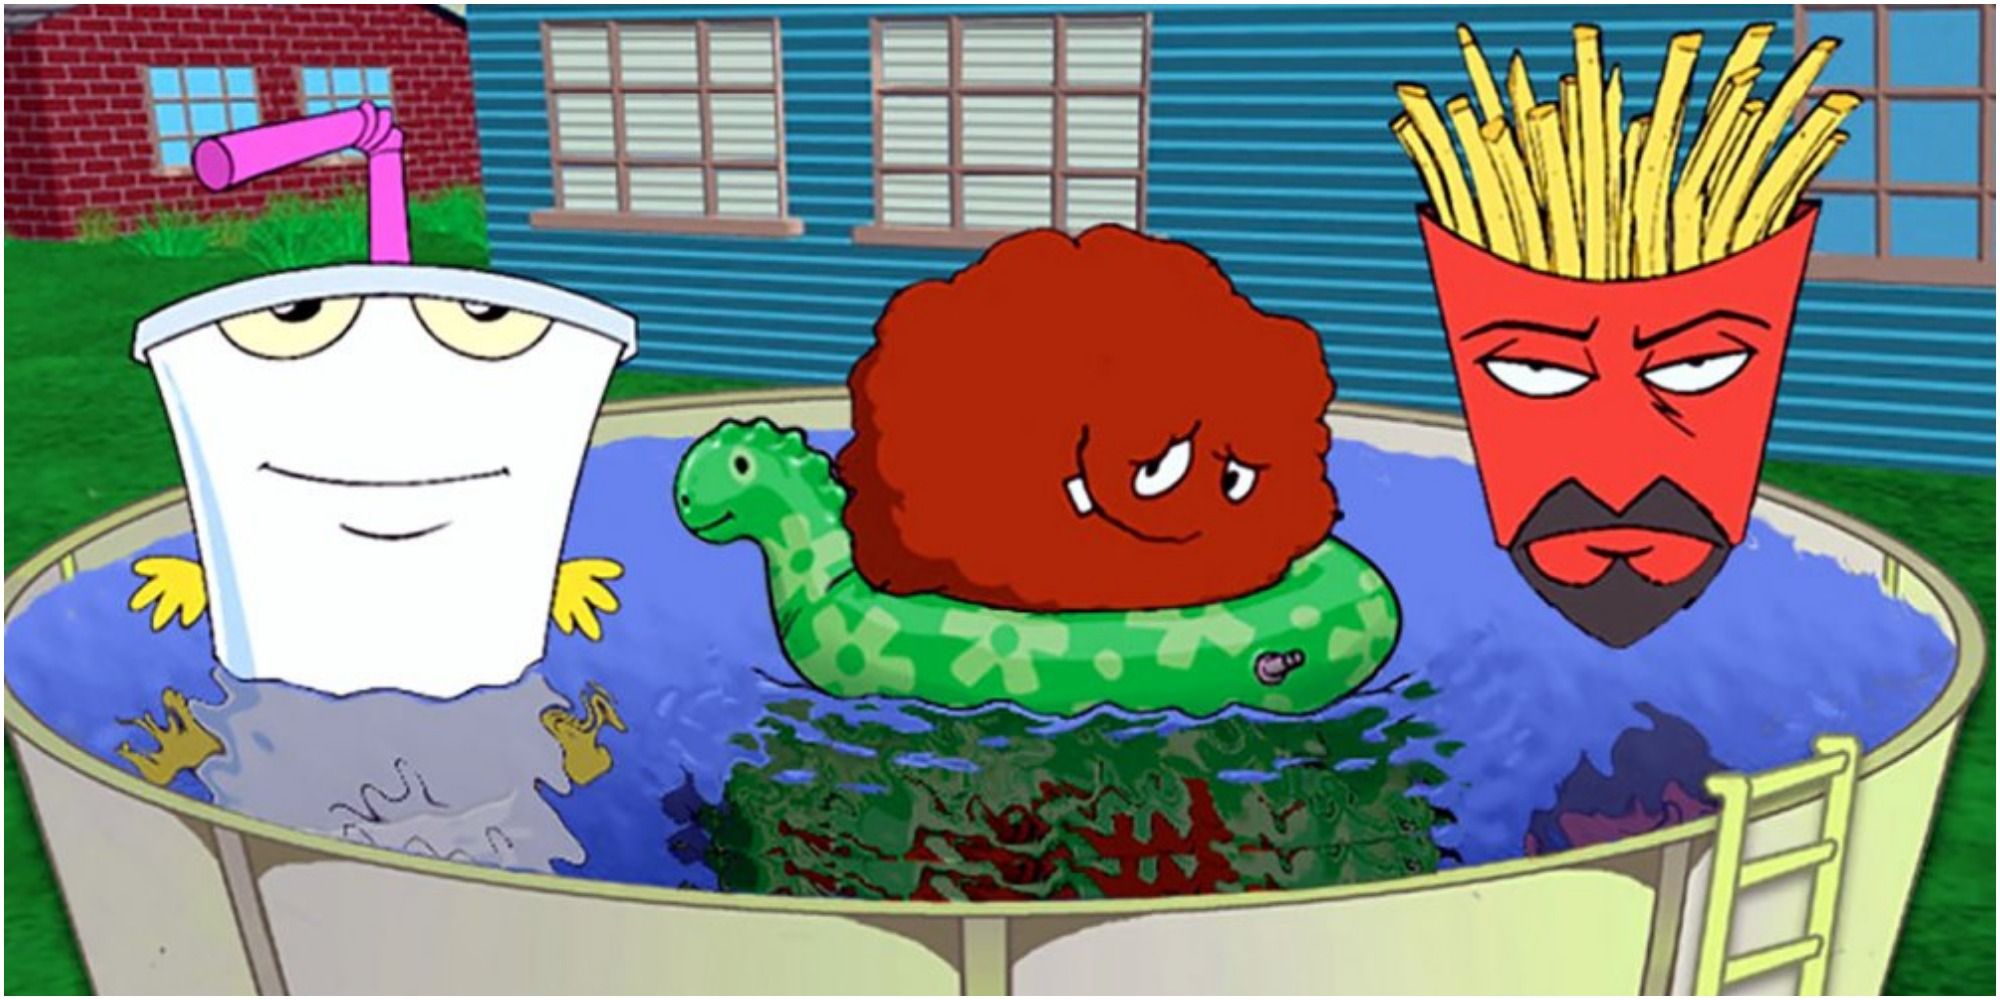 Meatwad, Fry, and Shake float in a pool